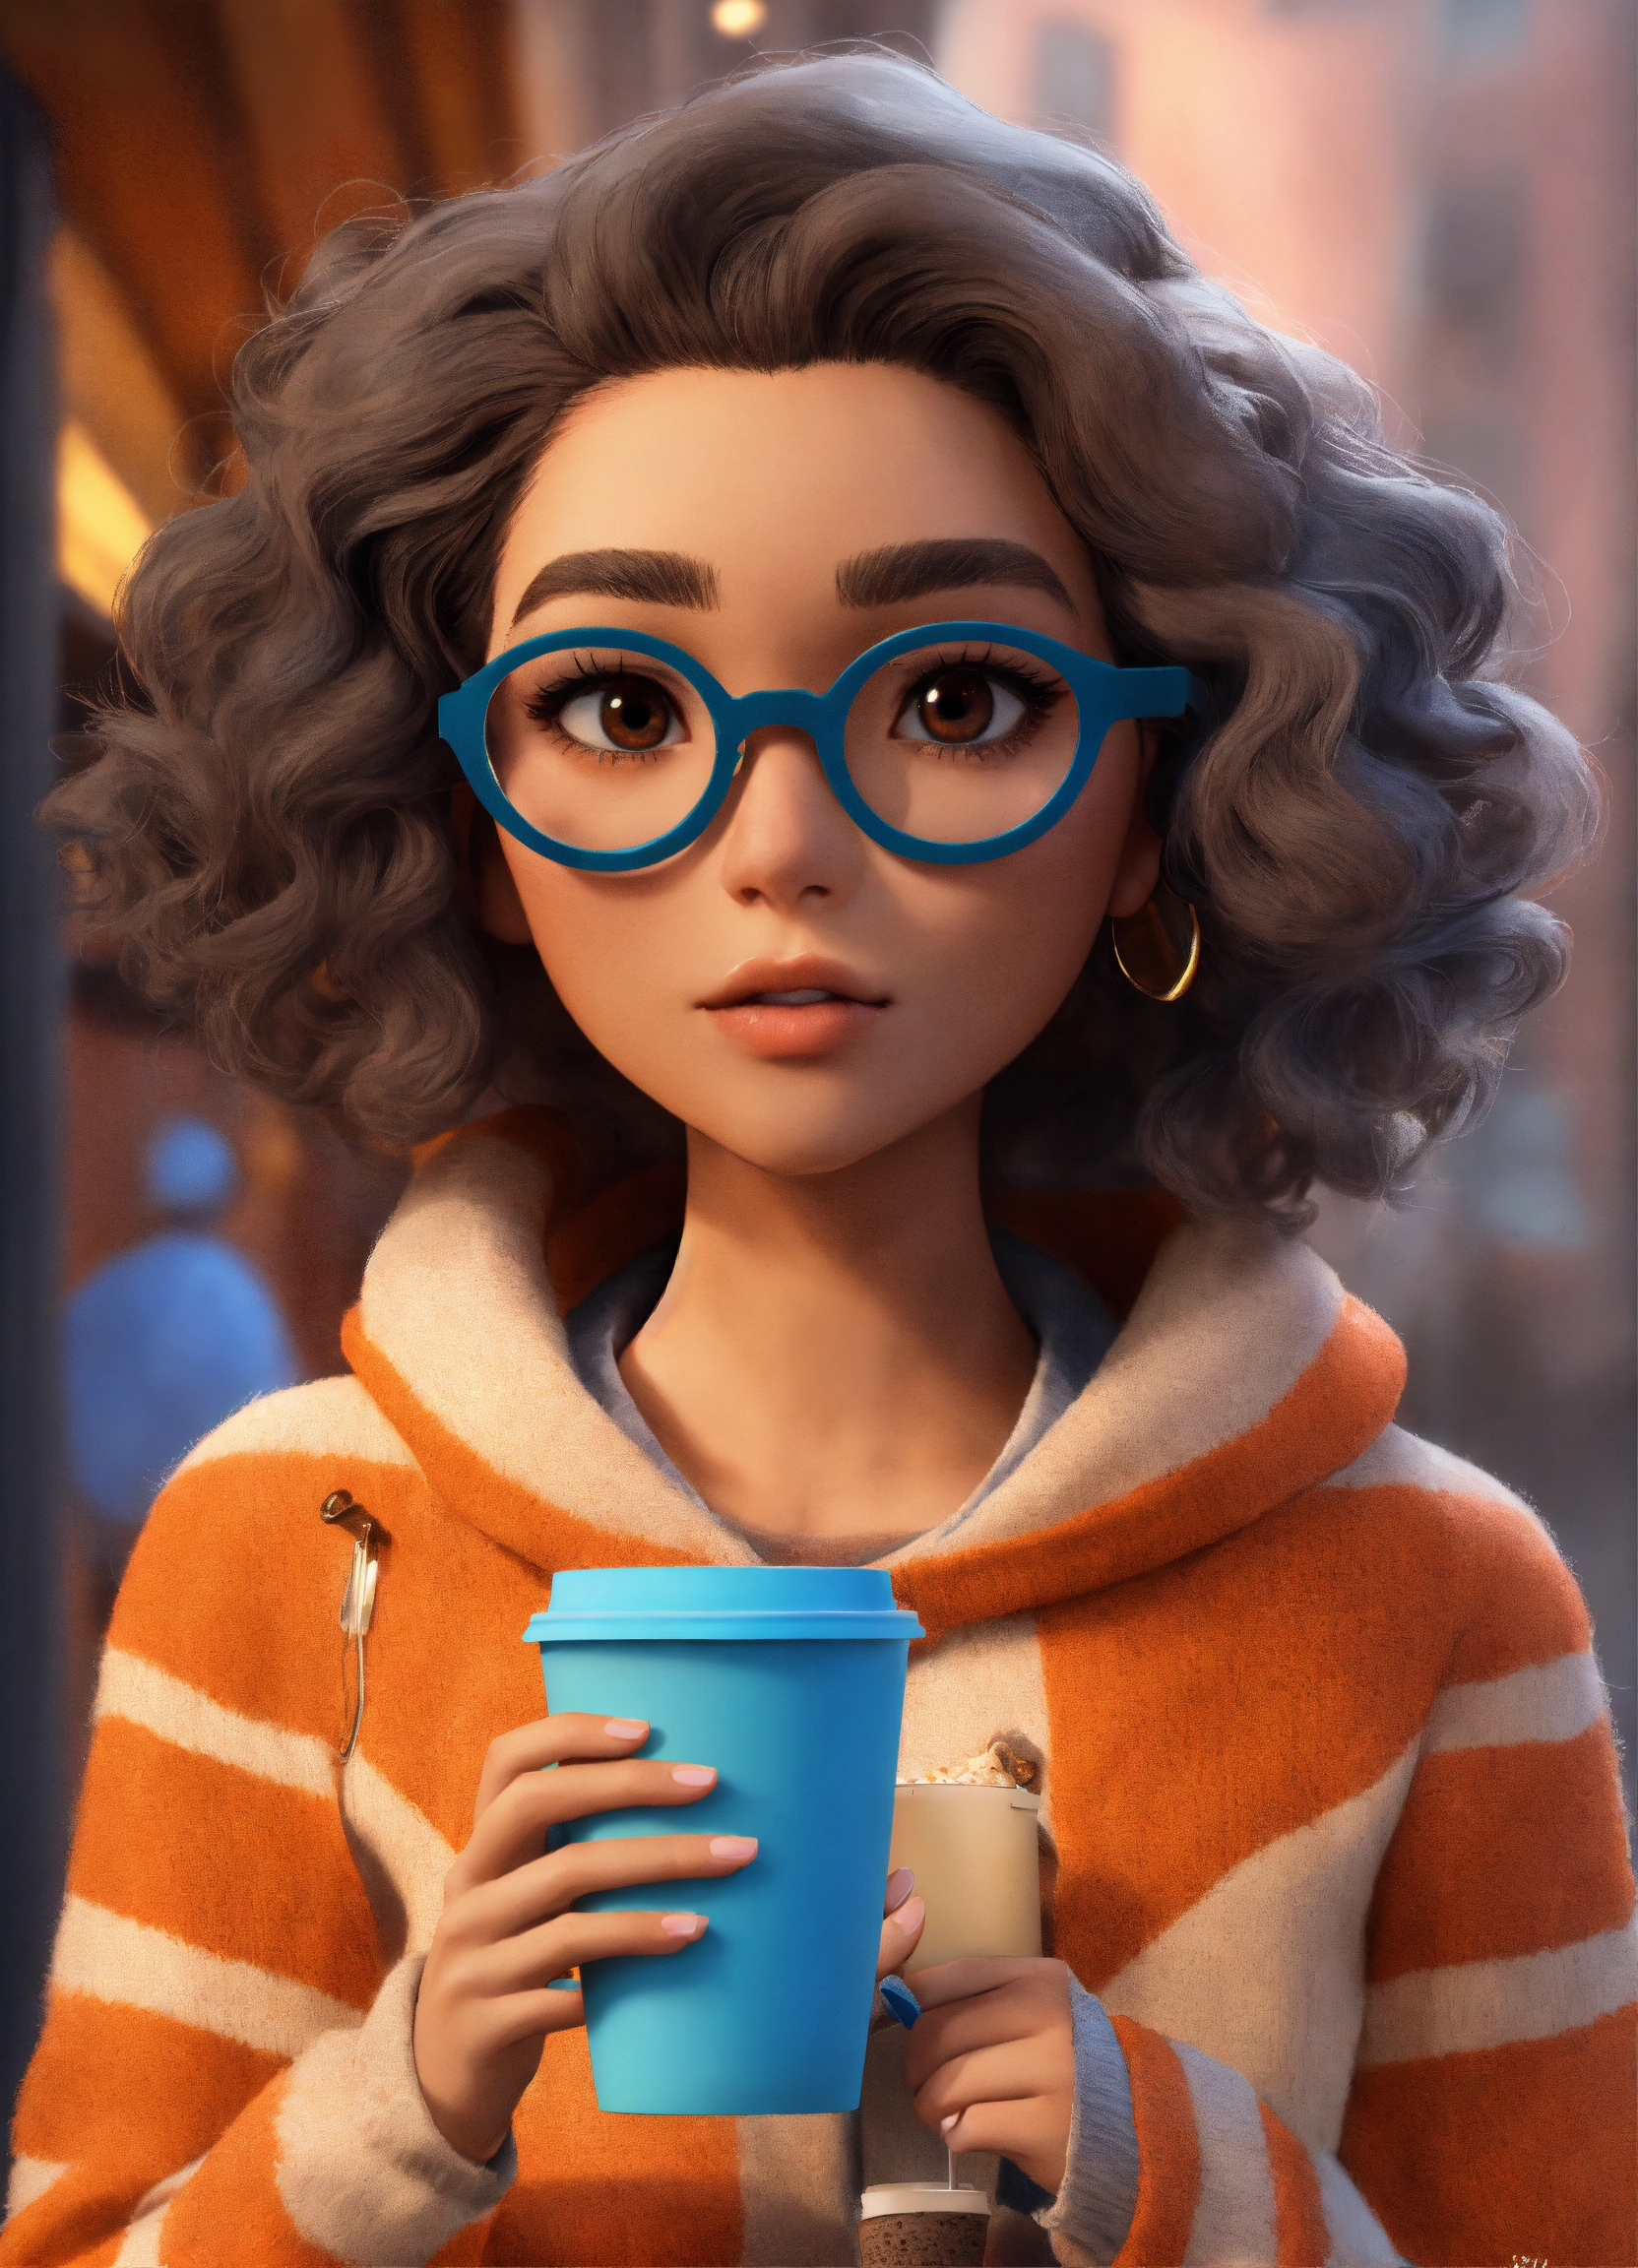 Lexica - Create a 3D rendered image of a stylized, animated female ...